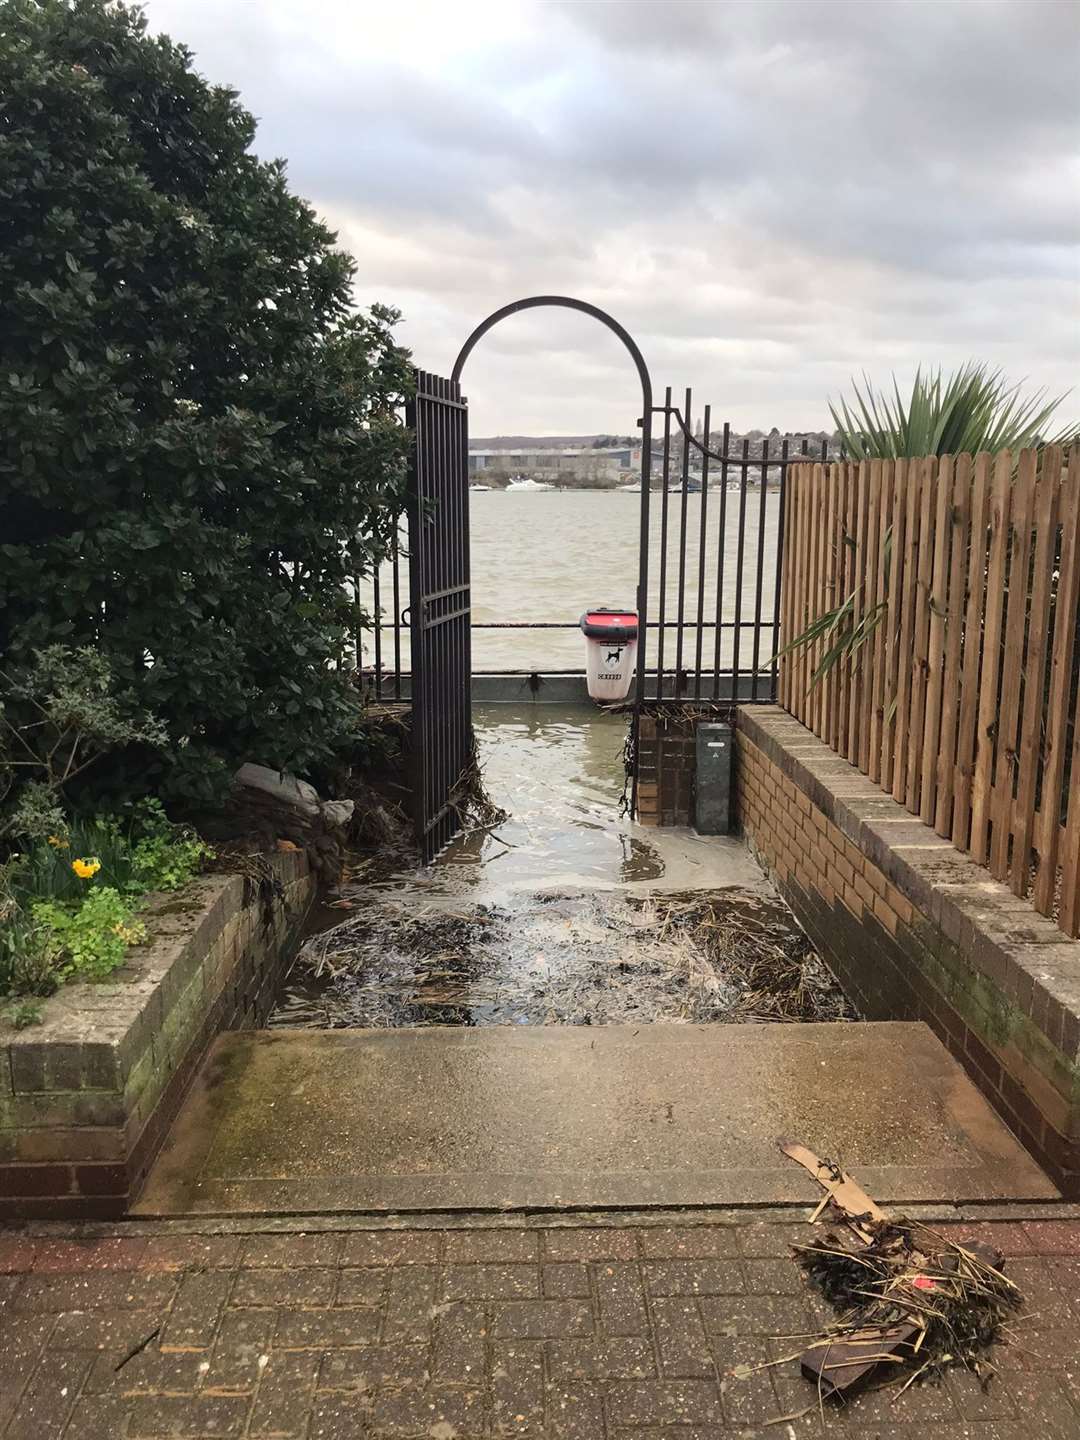 Flooding at the Esplanade in Rochester. Image: the Caithness family